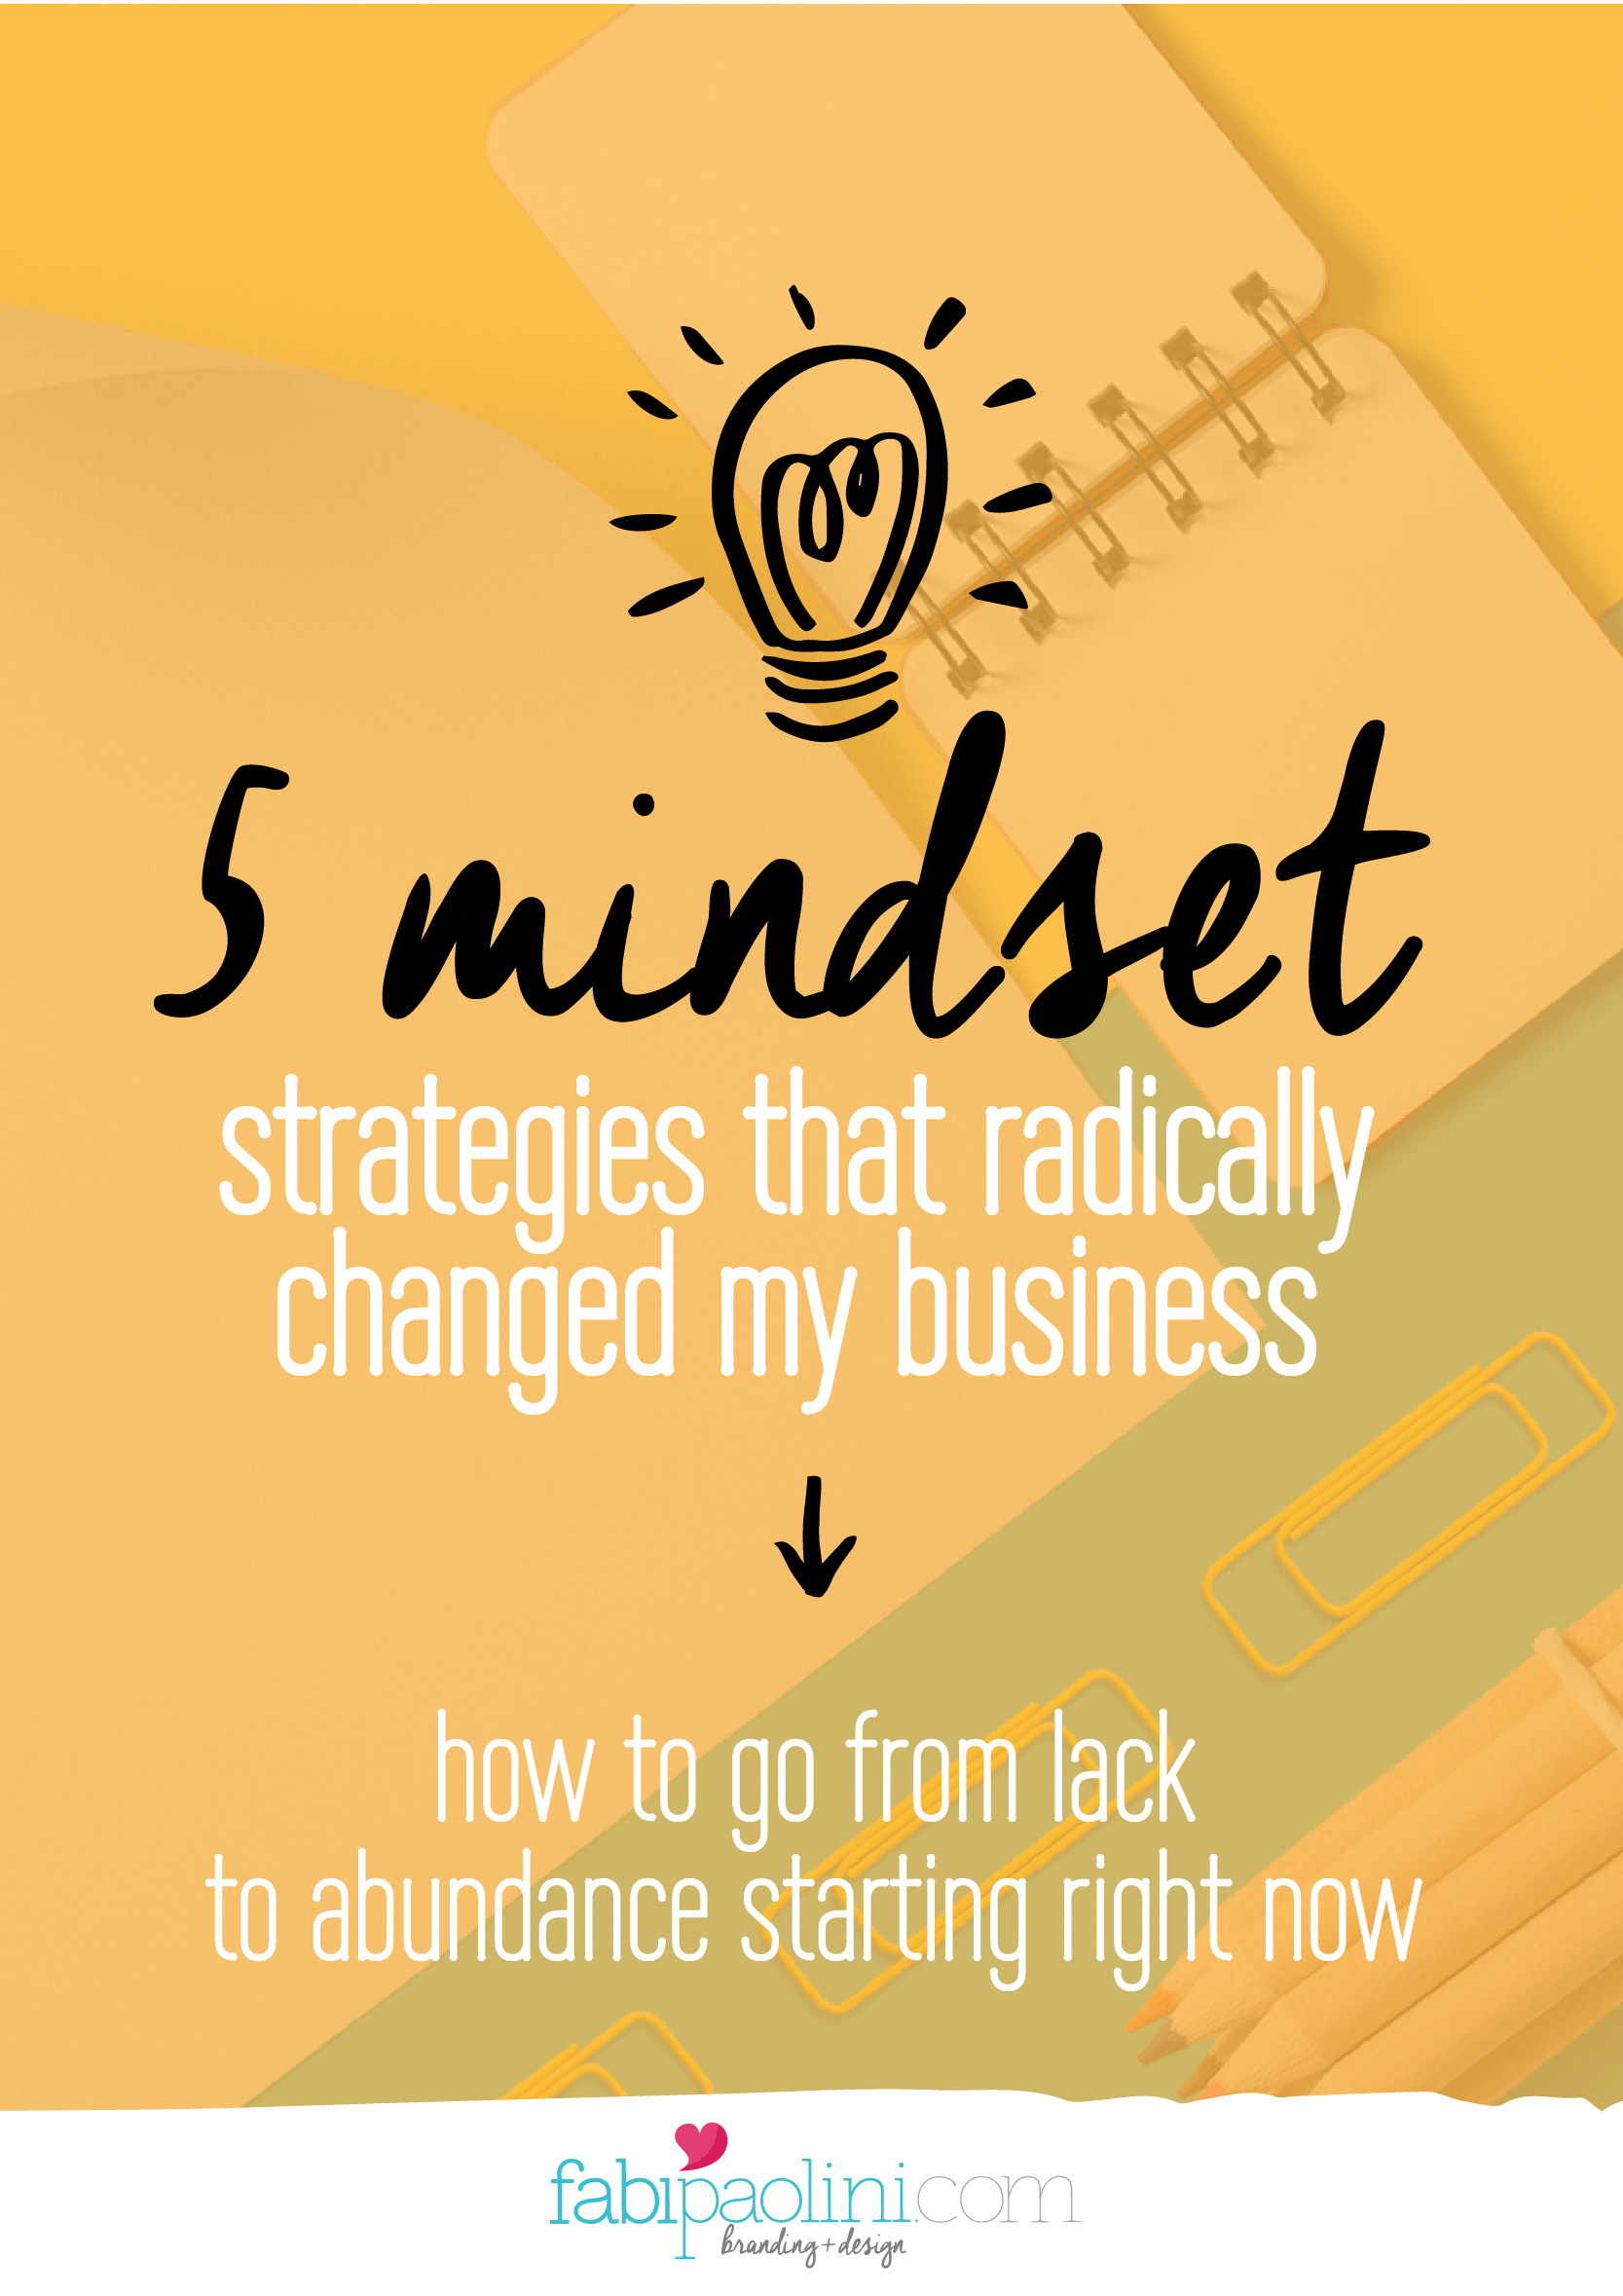 5 mindset strategies that changed my business. How to go from lack to abundance. Free guide inside